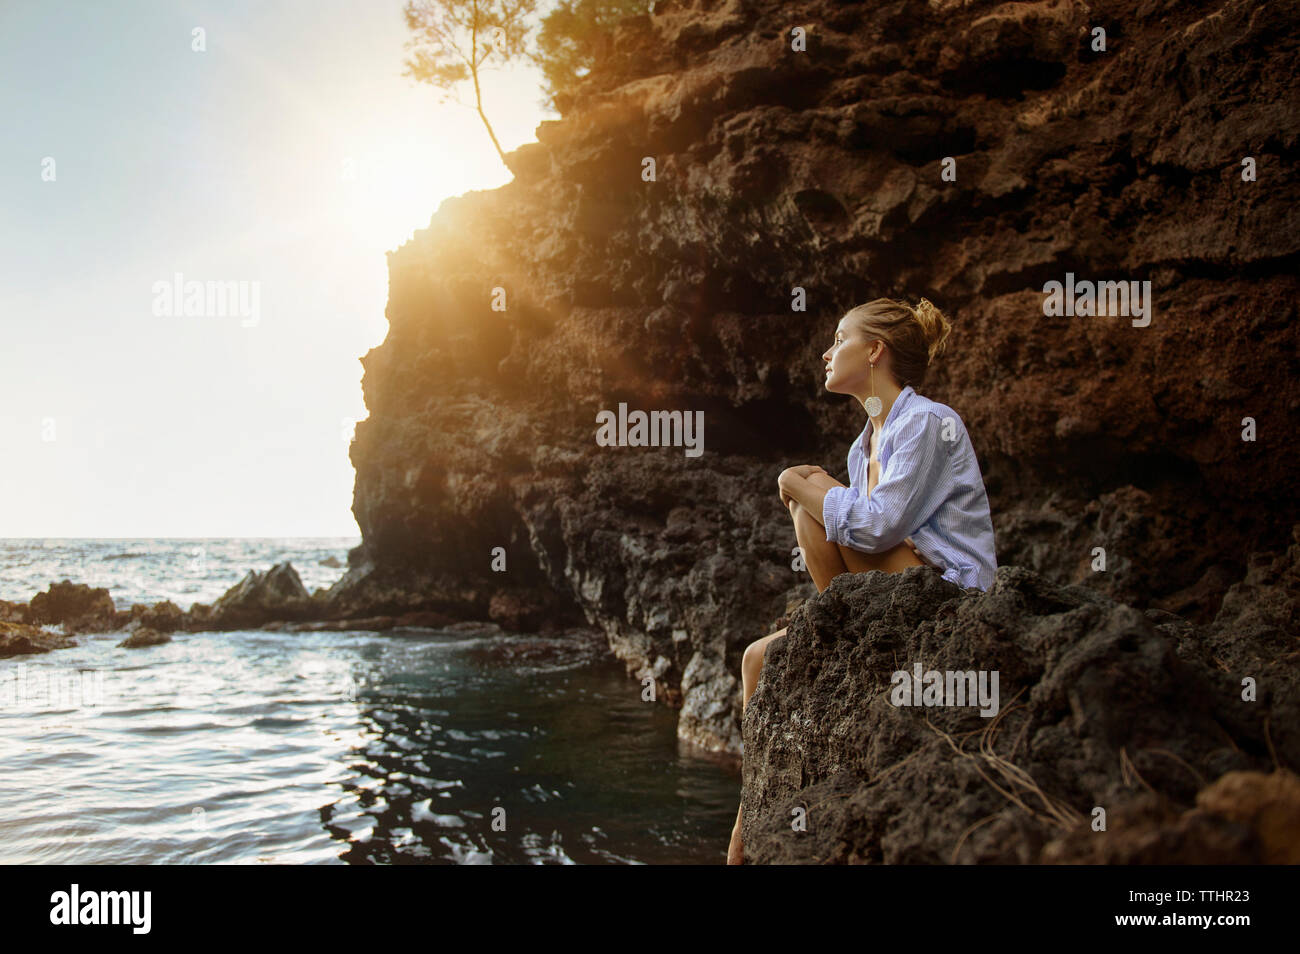 Thoughtful woman sitting on rock at beach Banque D'Images